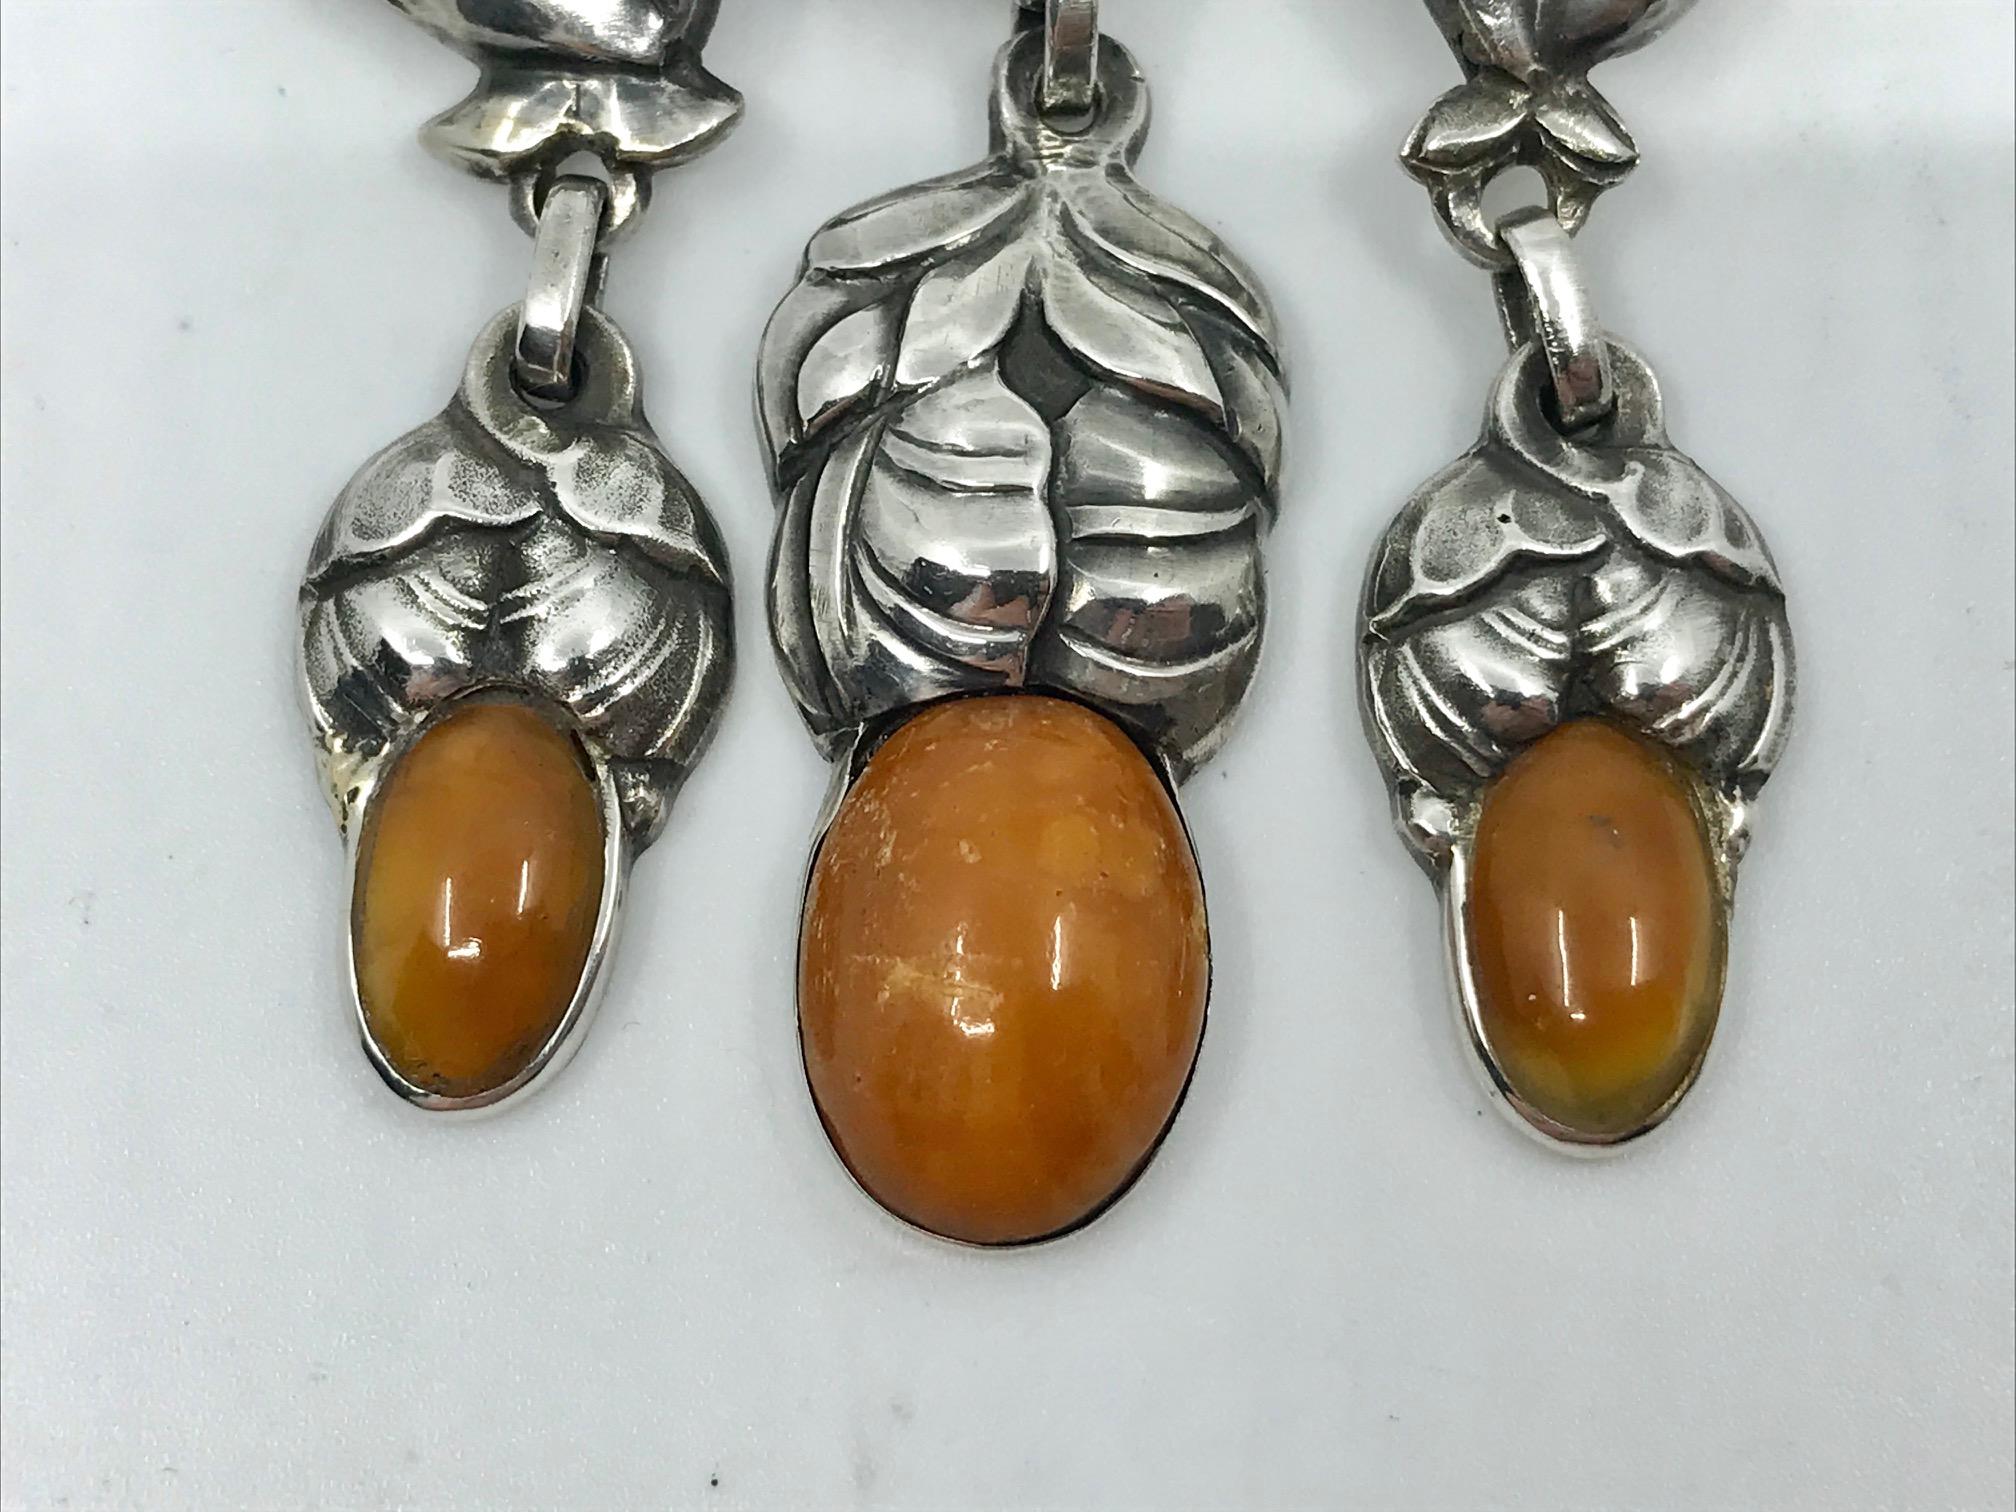 This is a rare antique silver Georg Jensen master brooch with seven cabochon set amber stones, design #98 by Gudmund Hentze from circa 1913.
Measures 3 1/4″ x 2 5/8″ (8.3cm x 6.6cm).
Antique Georg Jensen hallmarks from 1908-1914, 826s.